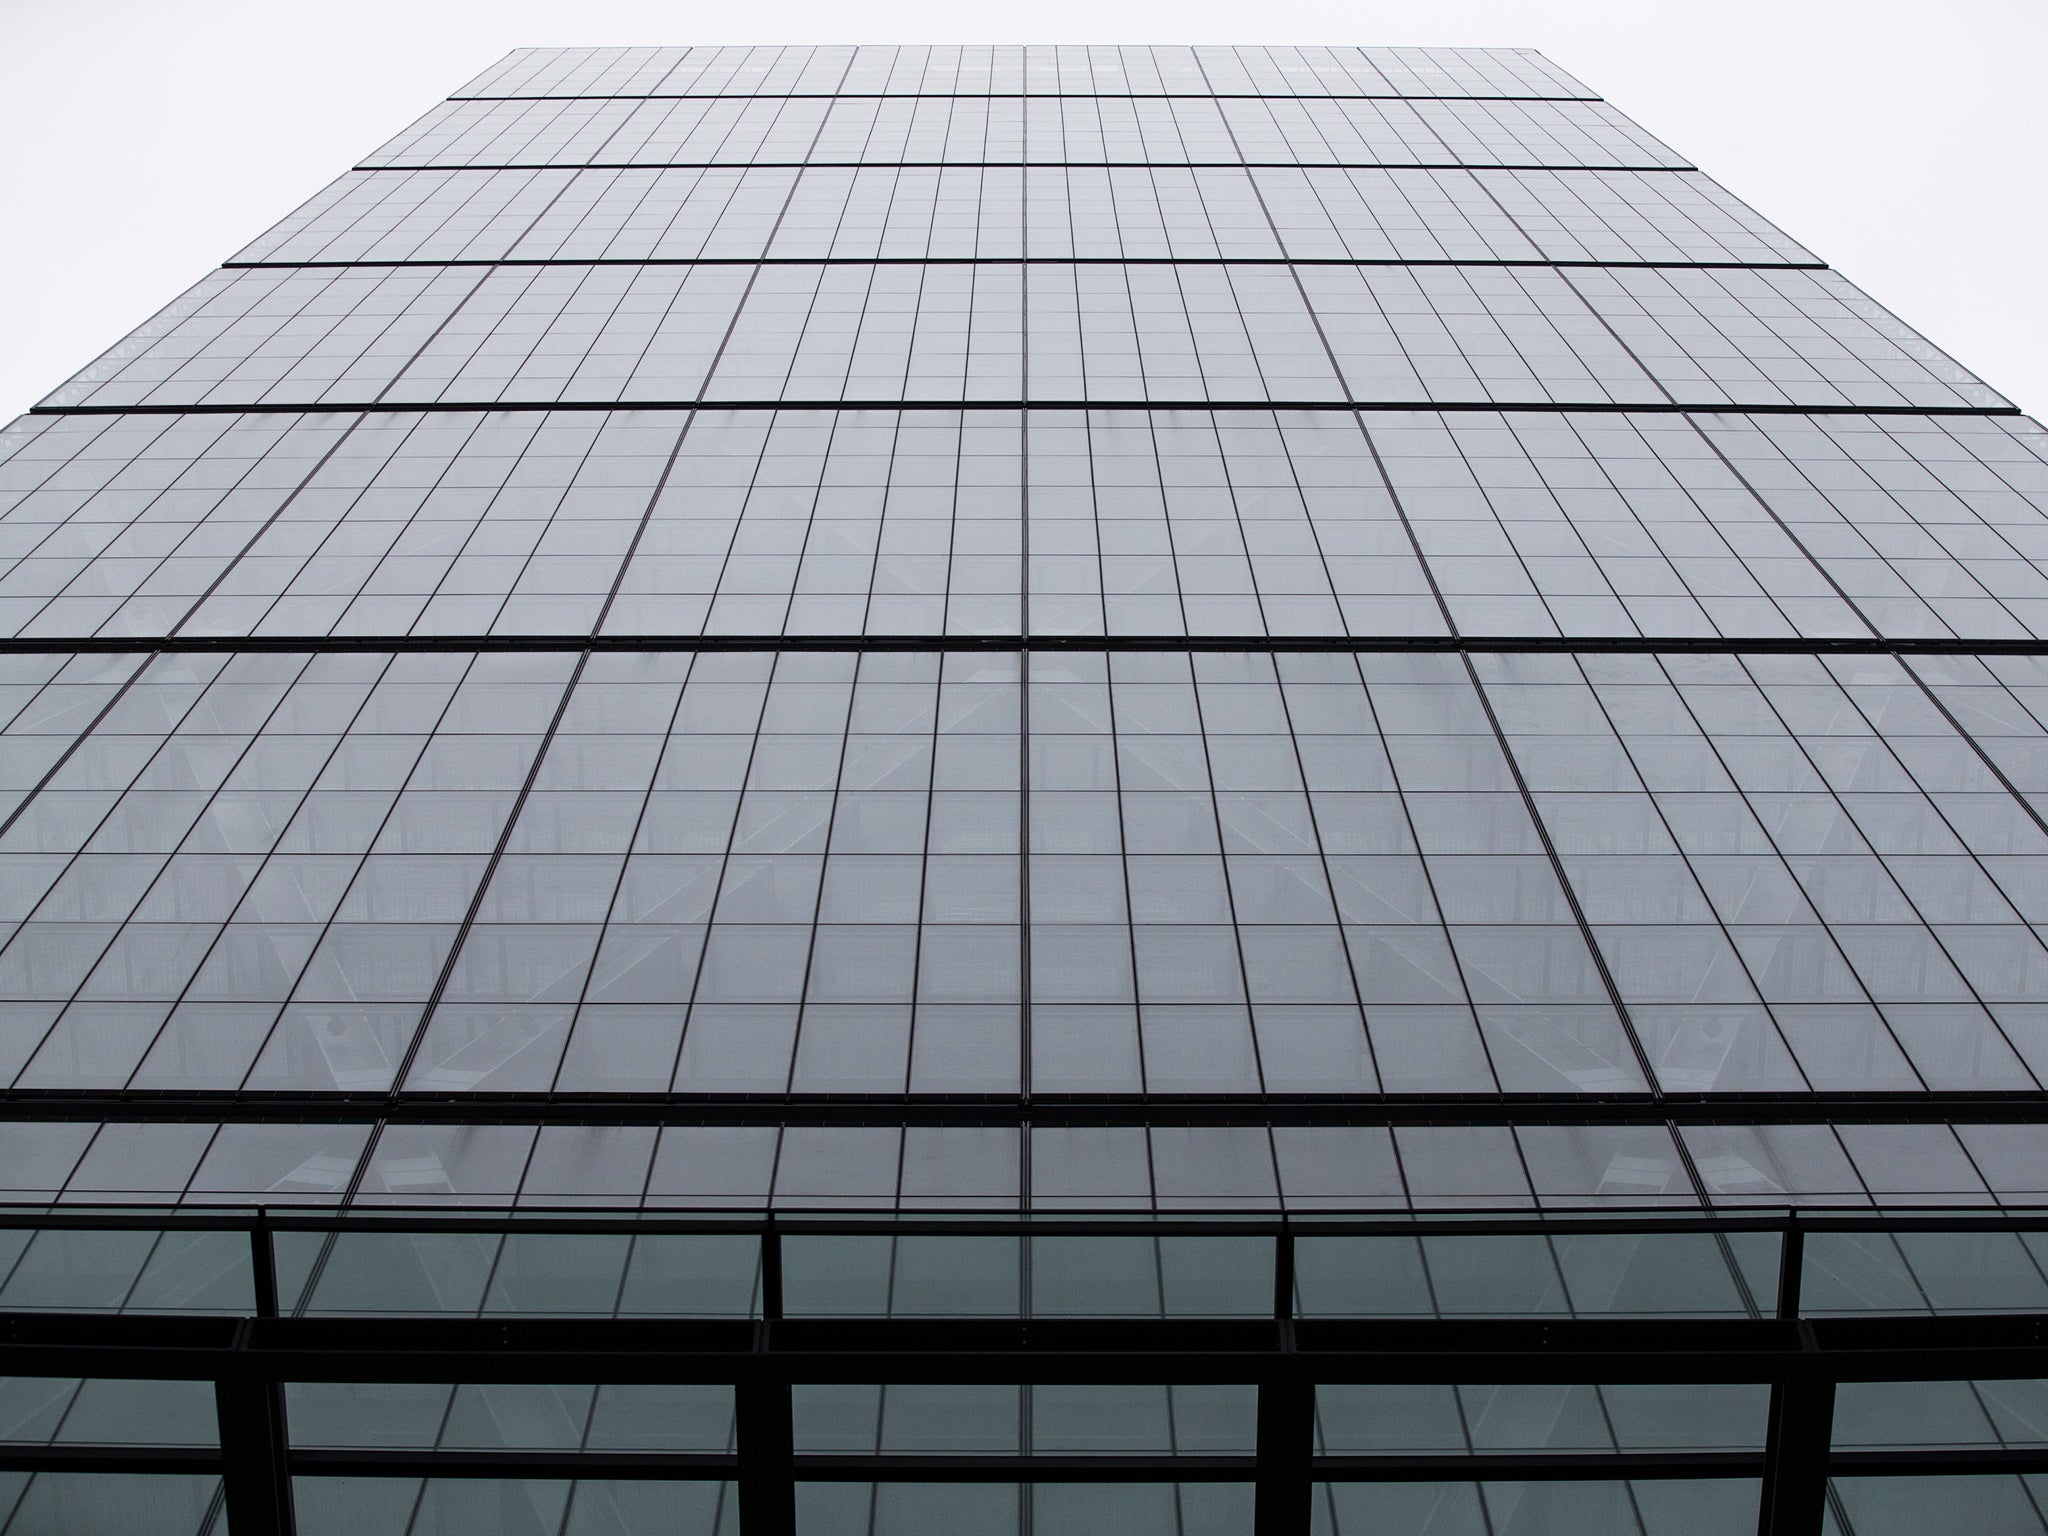 The exterior of the newly constructed skyscraper, The Leadenhall Building in London